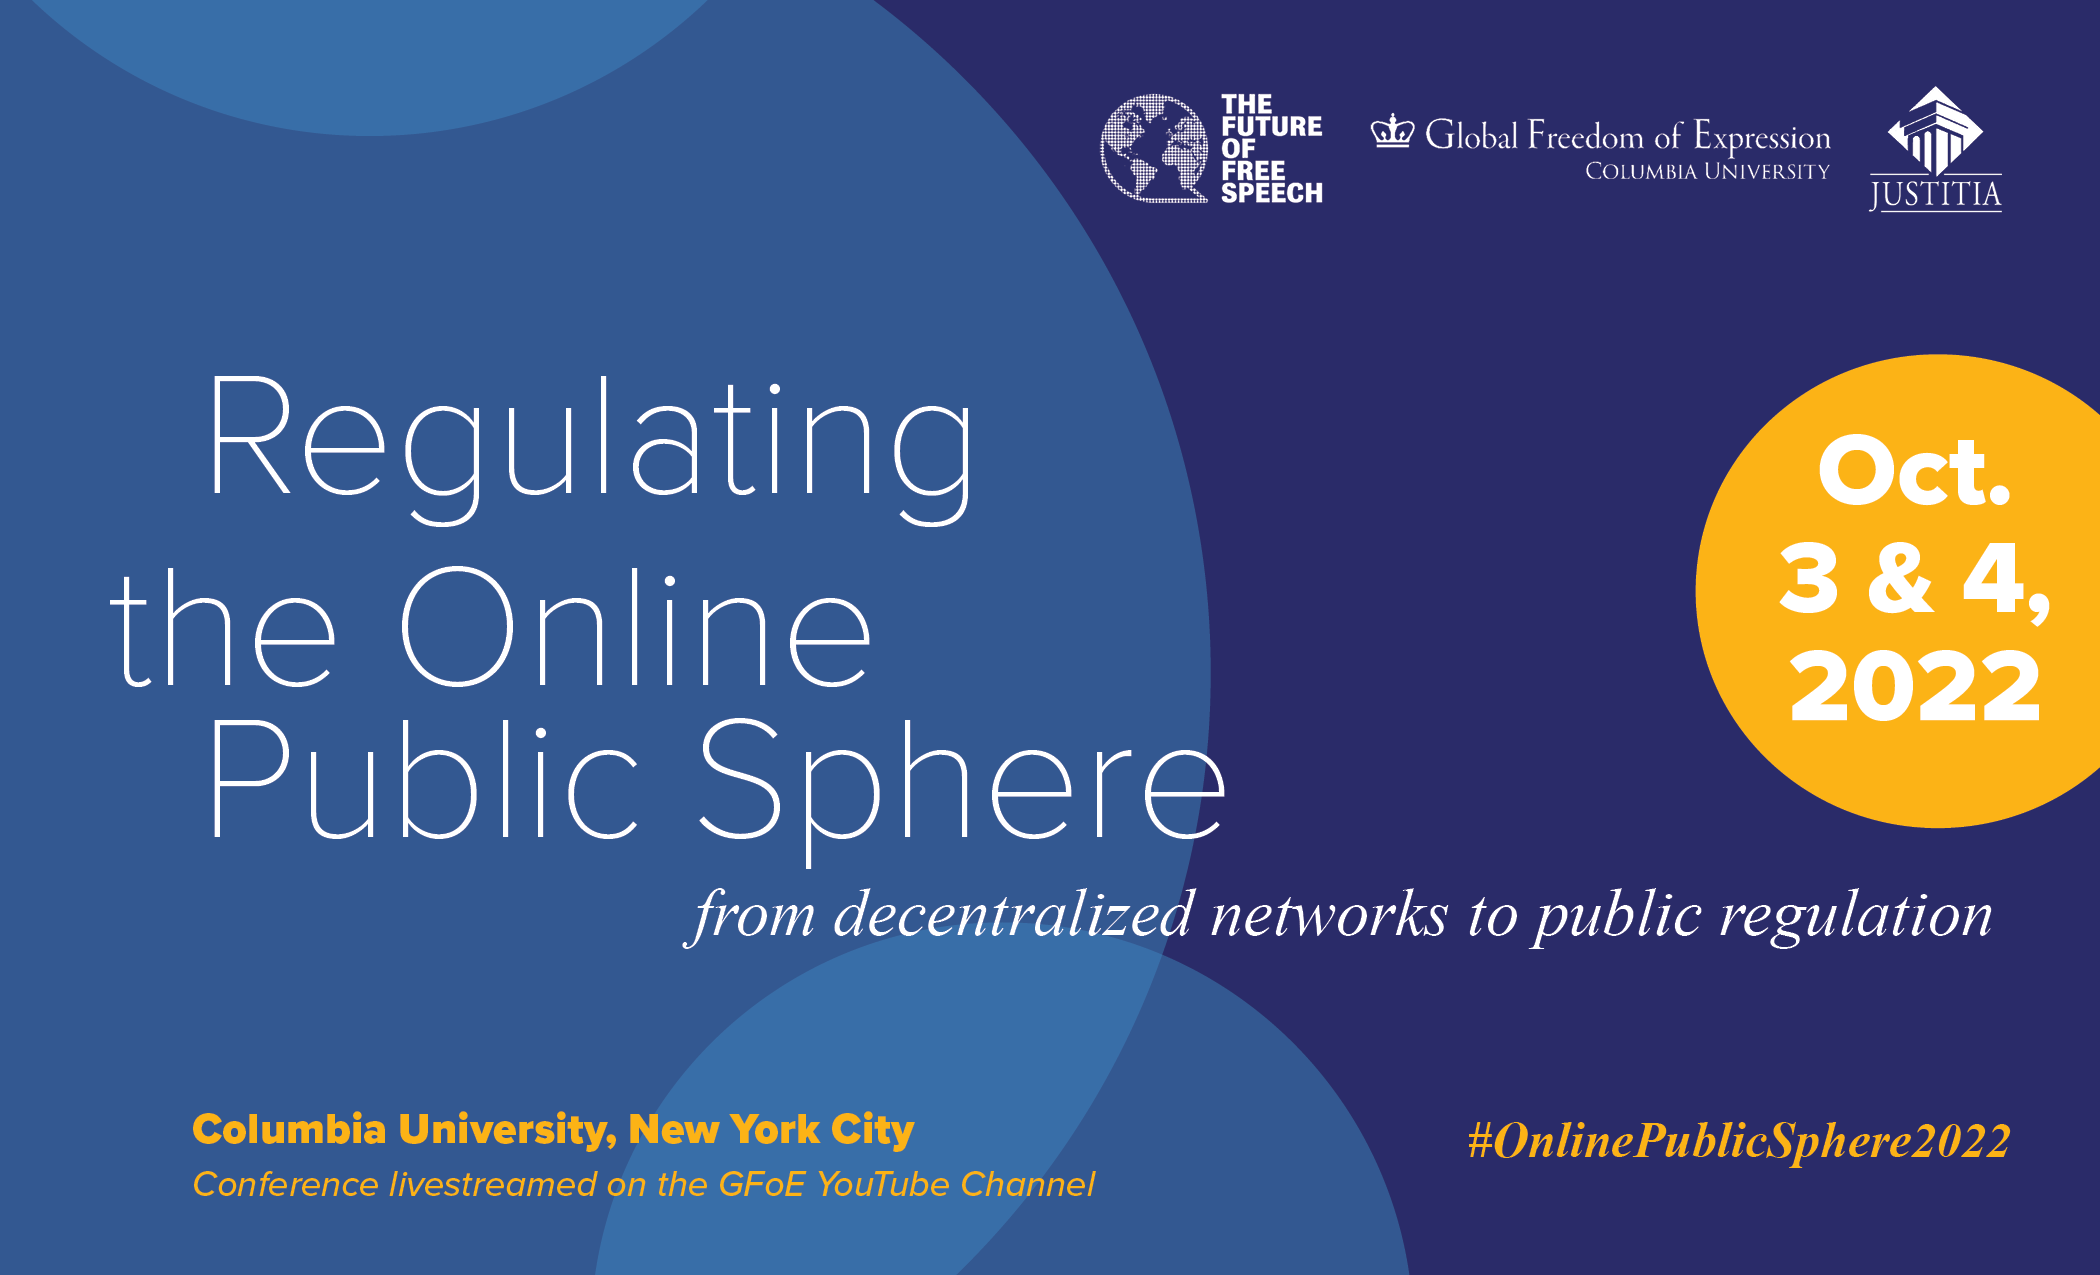 Global Freedom of Expression REGULATING THE ONLINE PUBLIC SPHERE From Decentralized Networks to Public Regulation